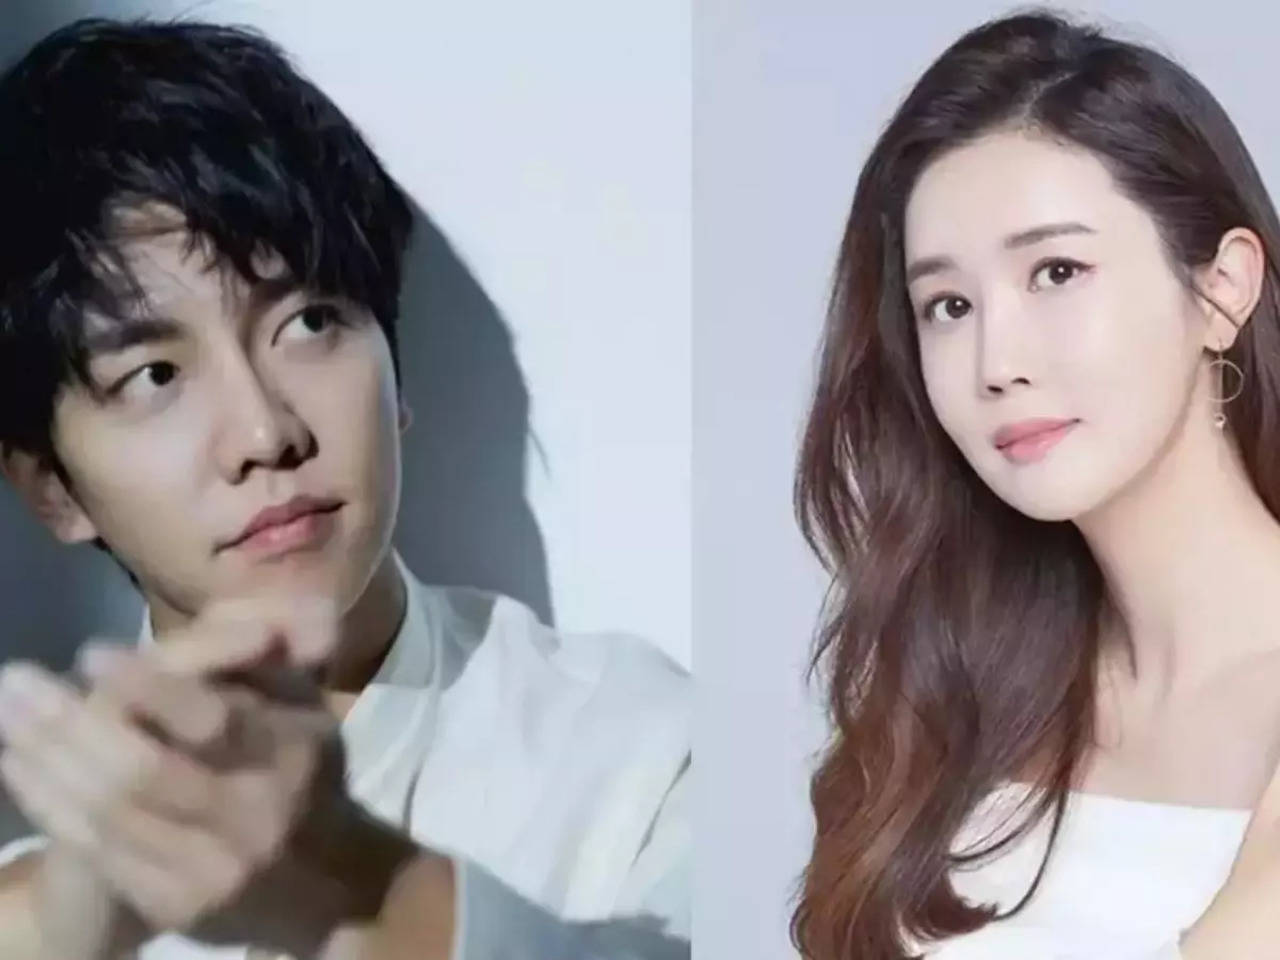 K-pop star Lee Seung Gi to marry girlfriend Lee Da In | K-pop Movie News -  Times of India